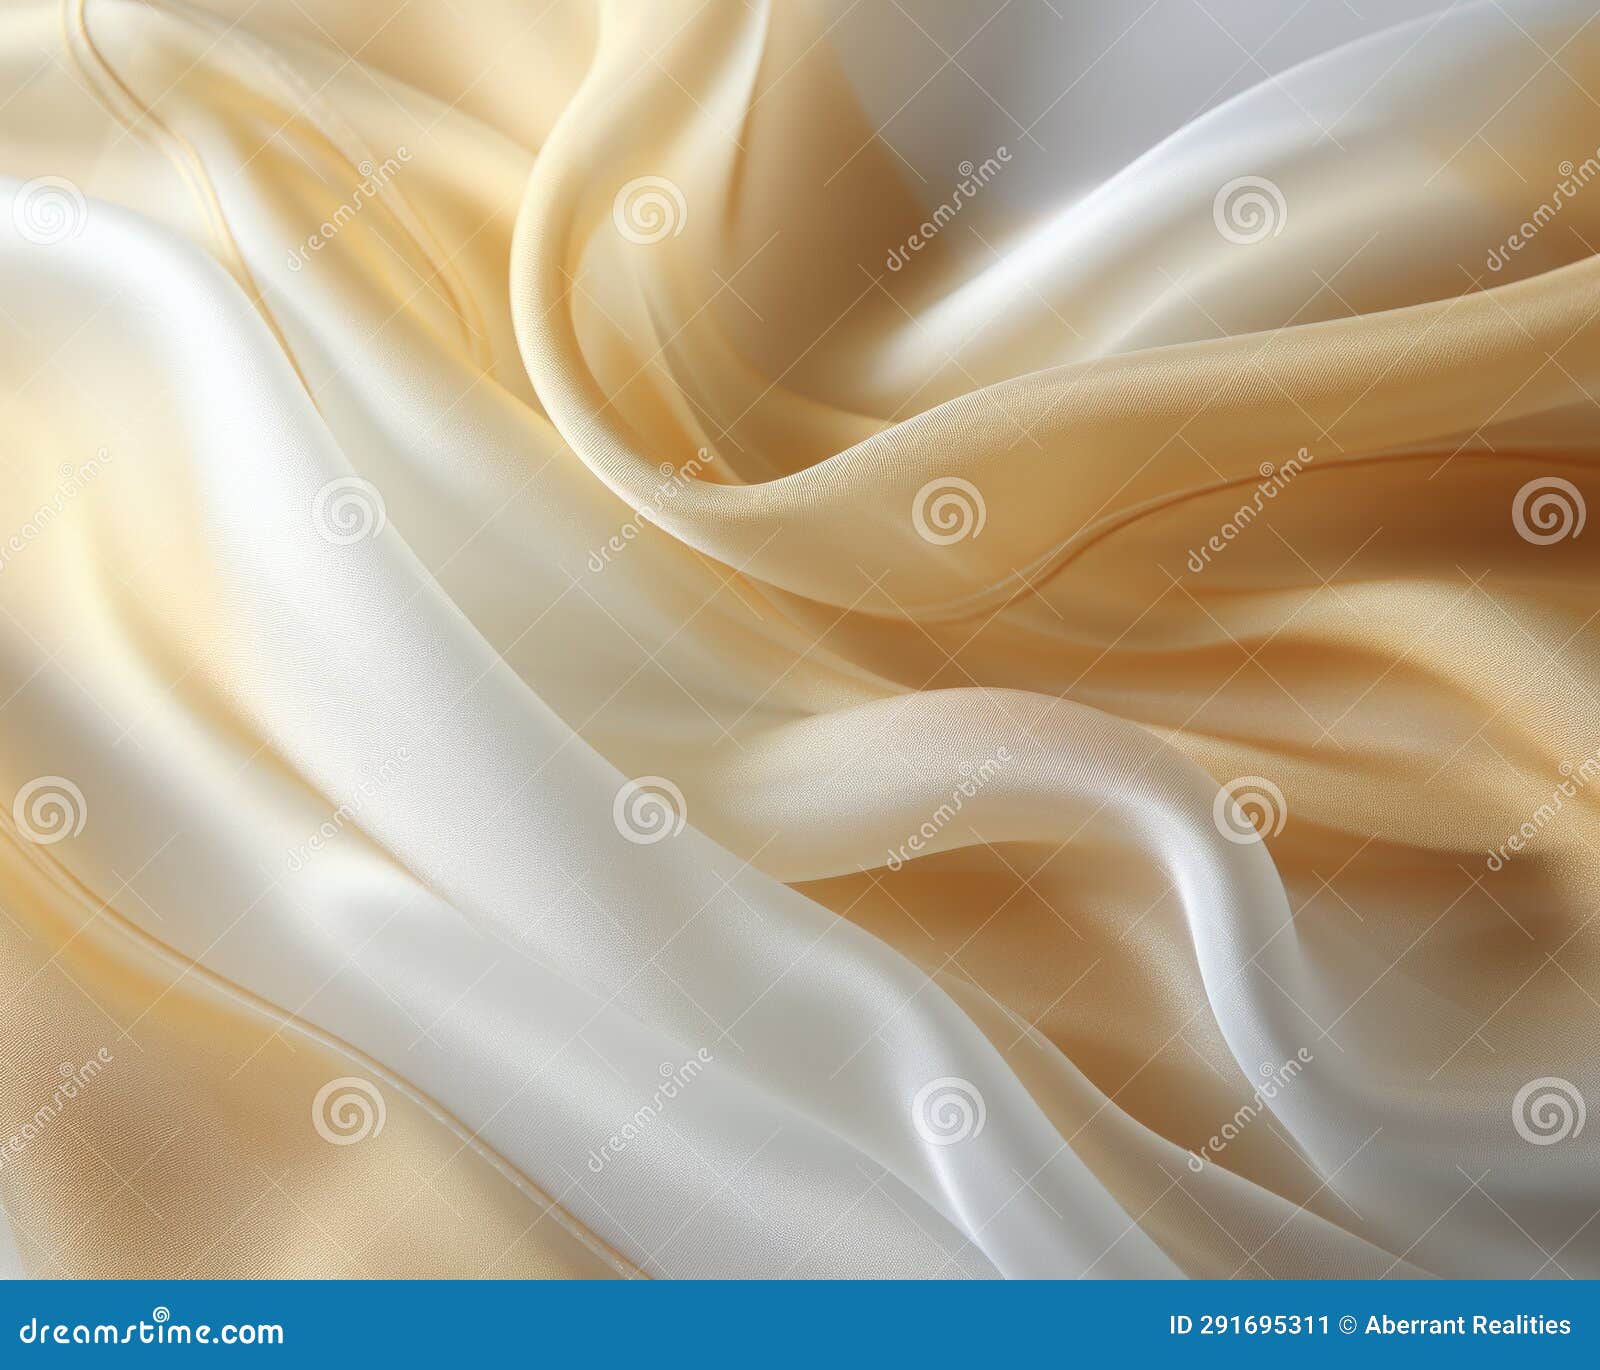 An Image of a White and Gold Silk Fabric Stock Illustration ...